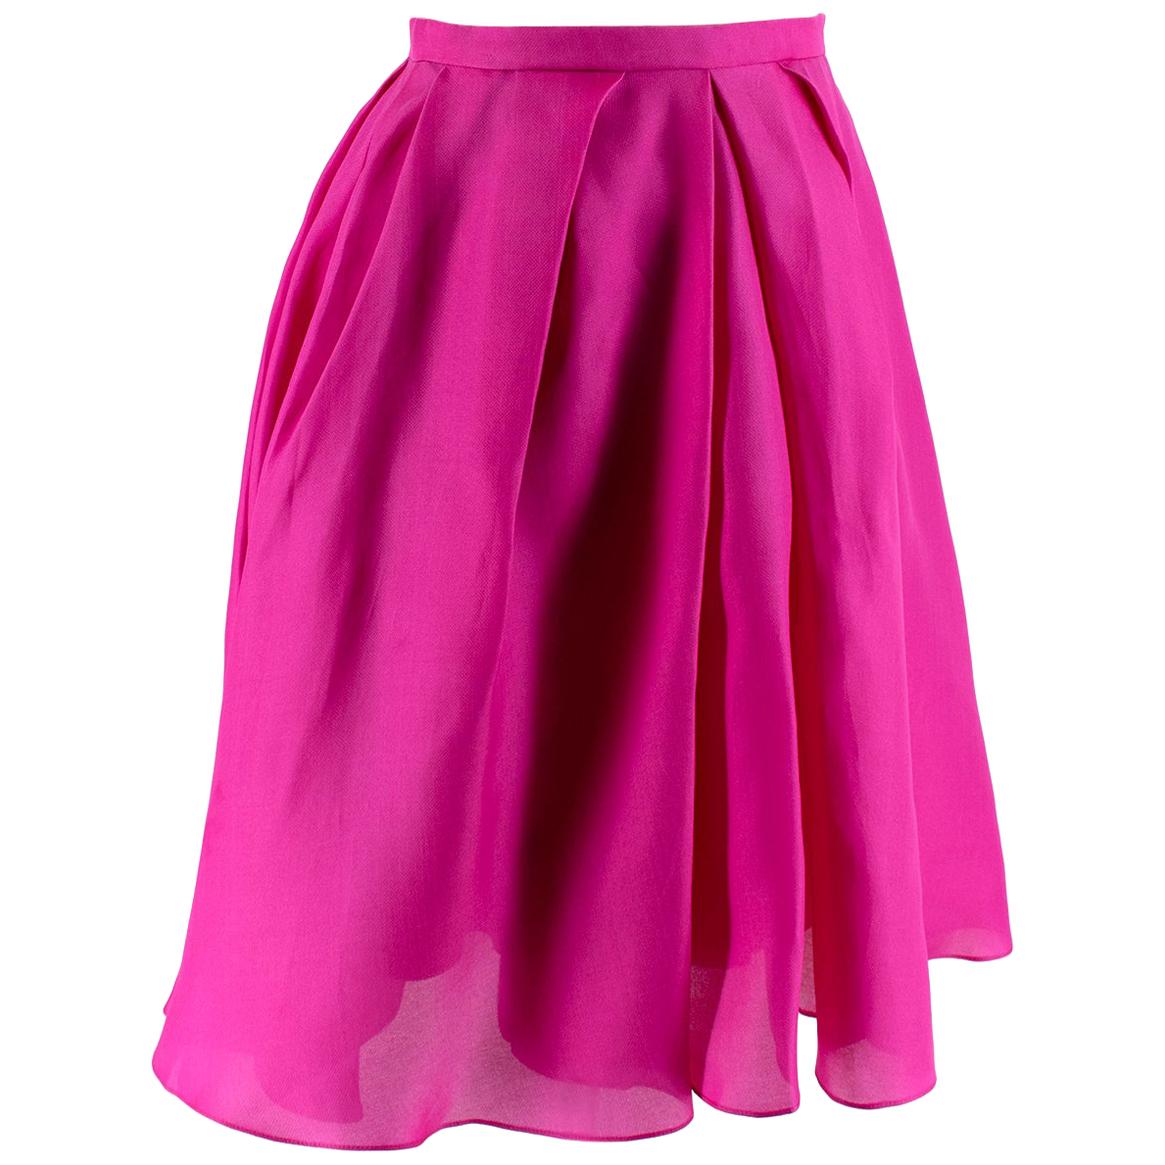 Christian Dior Fuchsia Pink Skirt

- Silk blend with diamond weave
- Hidden side zip 
- Knee length
- Pleated floaty skirt
- Slightly glossy finish to the silk
- UK 8

Made in Italy

Fabric Composition:
100% Silk

Measurements are taken laying flat,